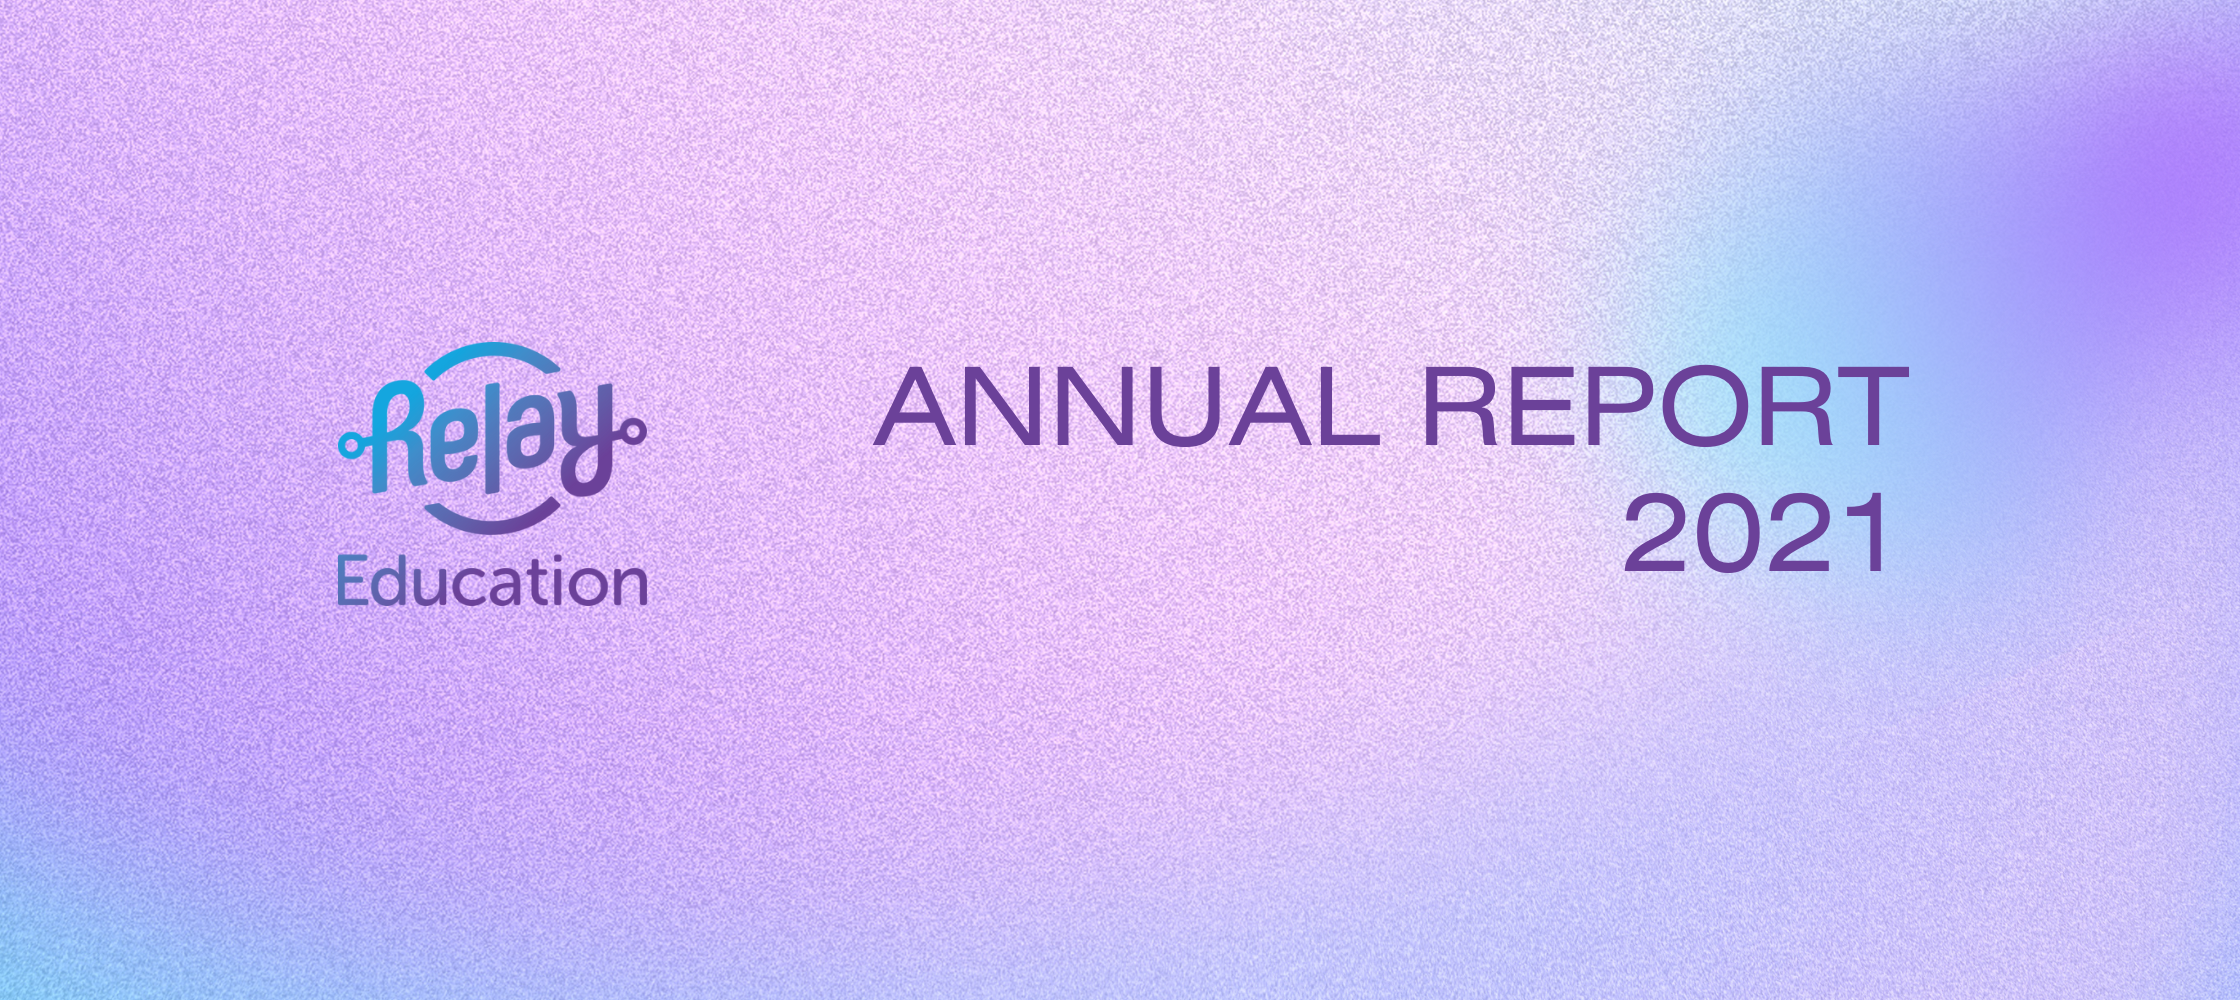 Relay education Annual Report 2021